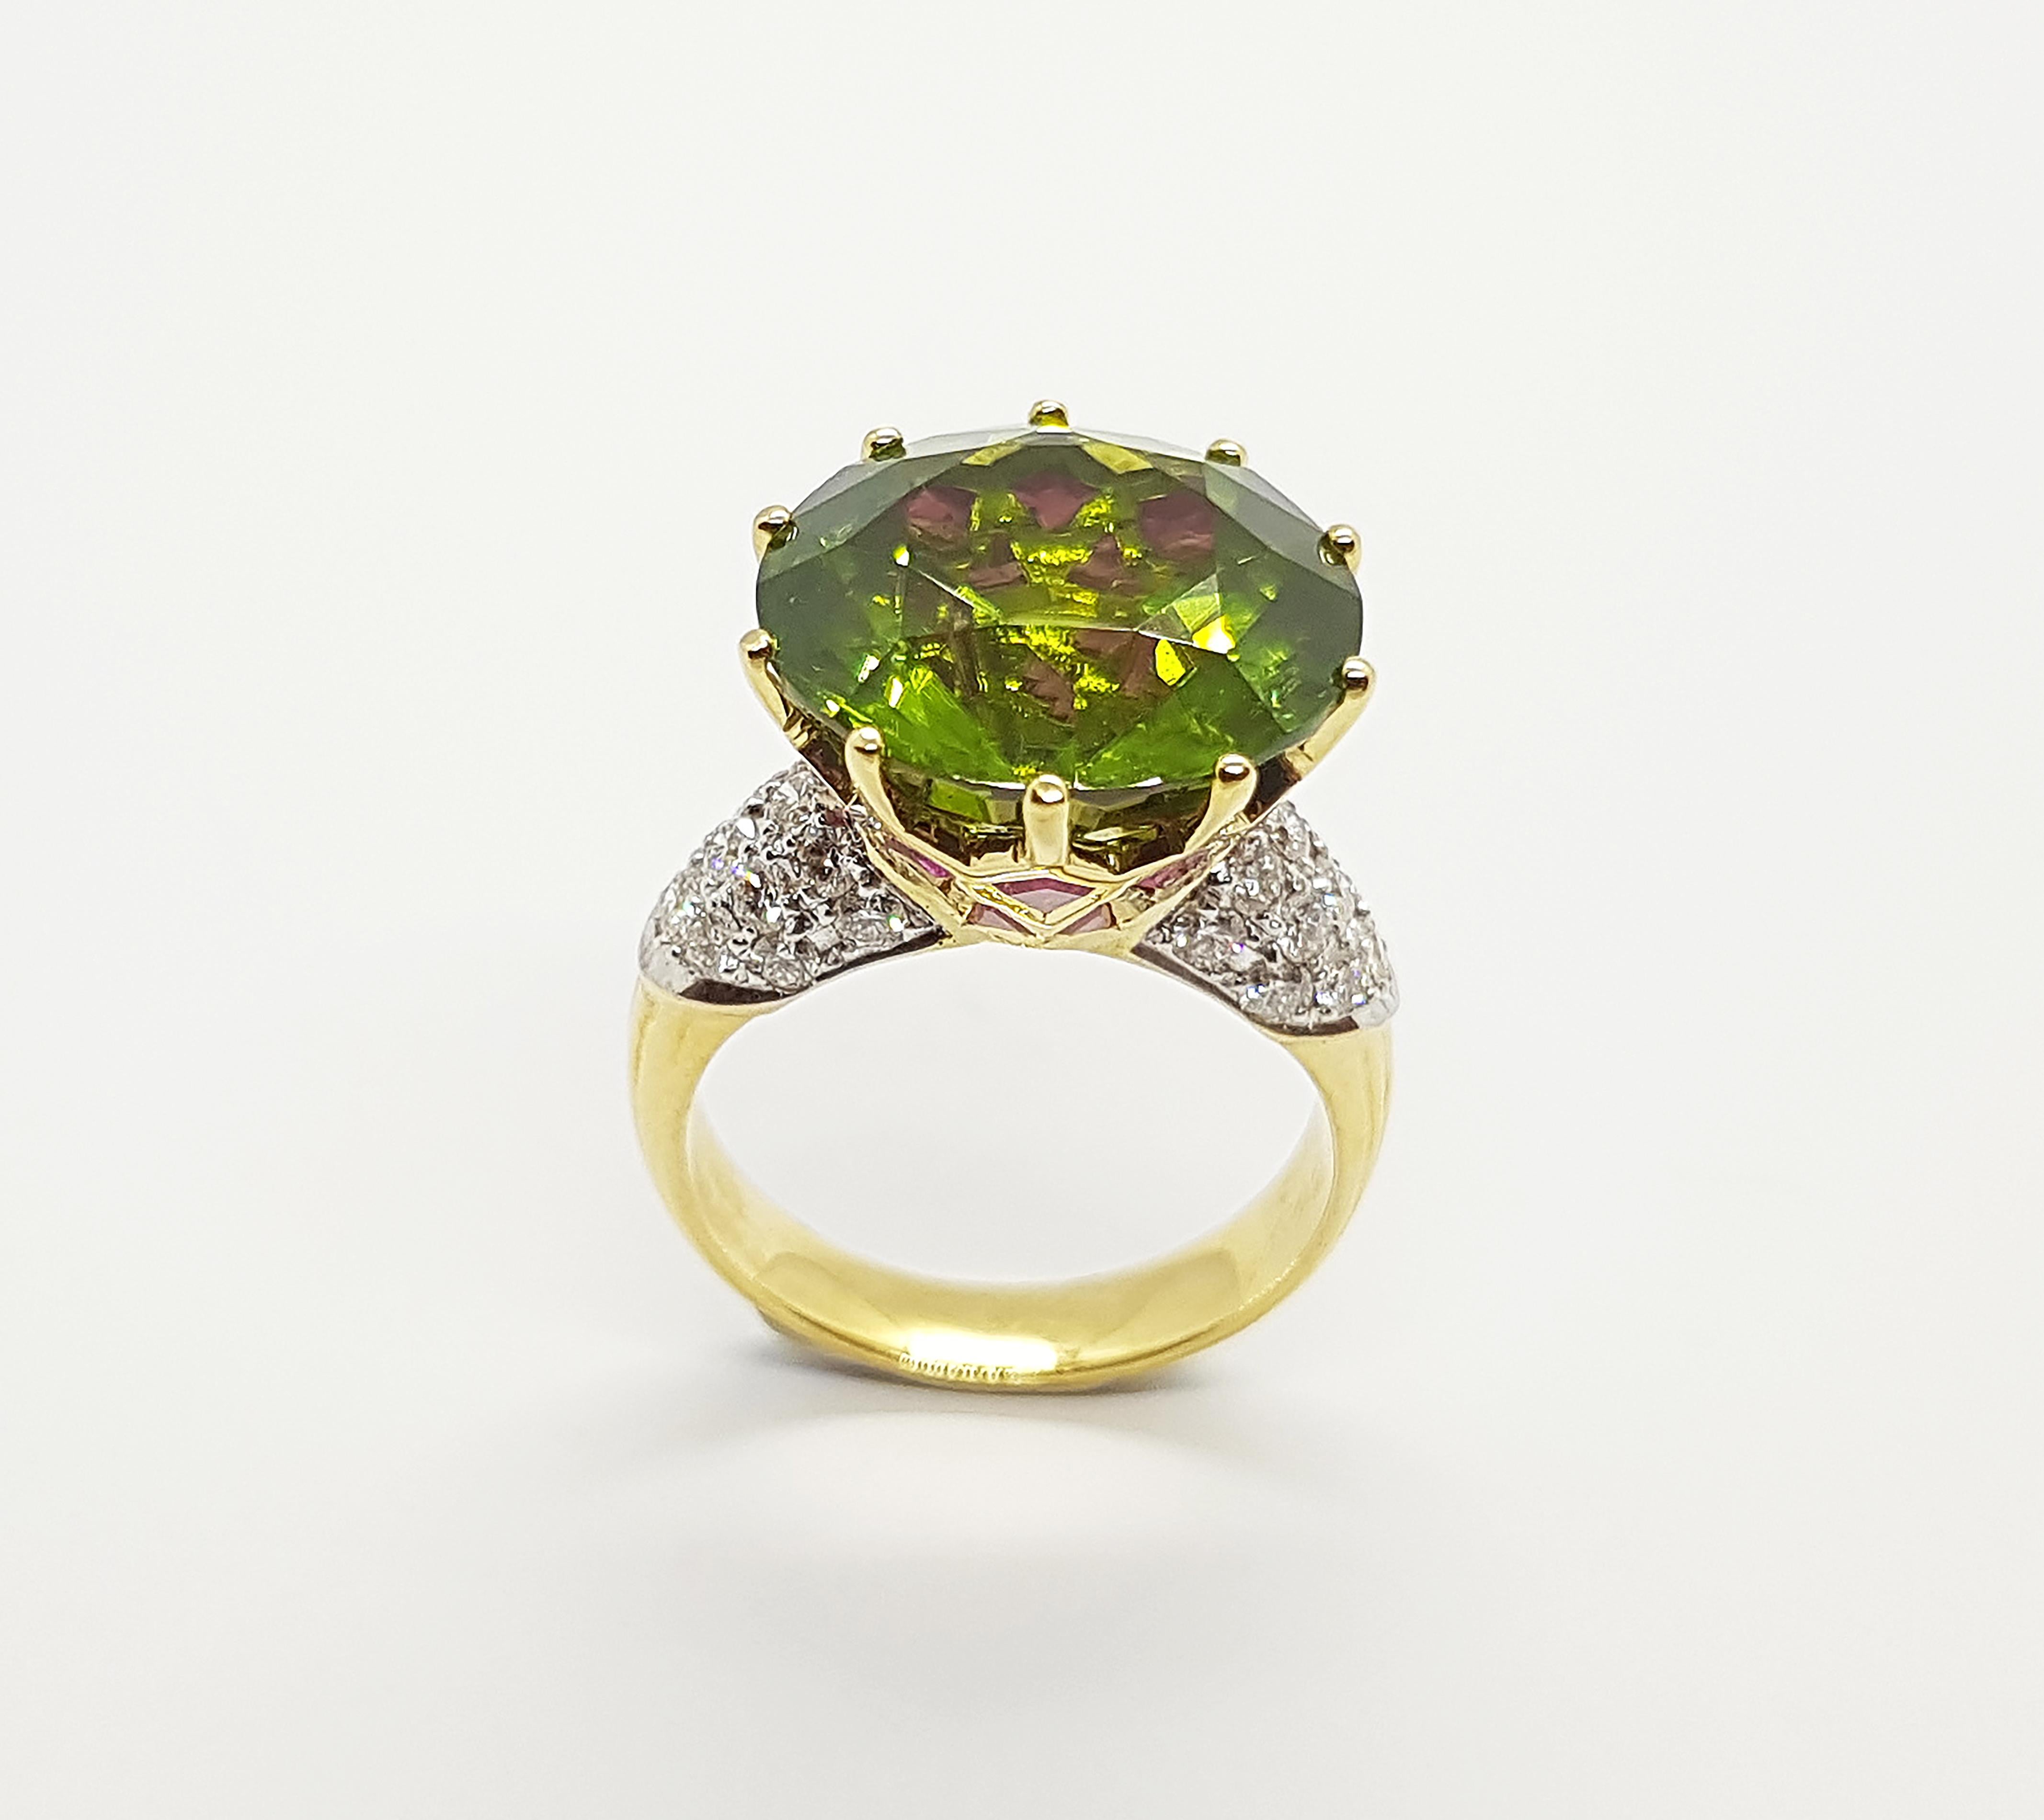 Peridot 12.15 carats with Ruby 1.80  carats and Diamond 0.65 carat Ring set in 18 Karat Gold Settings

Width:  1.5 cm 
Length:  1.5 cm
Ring Size: 52
Total Weight: 9.51 grams

